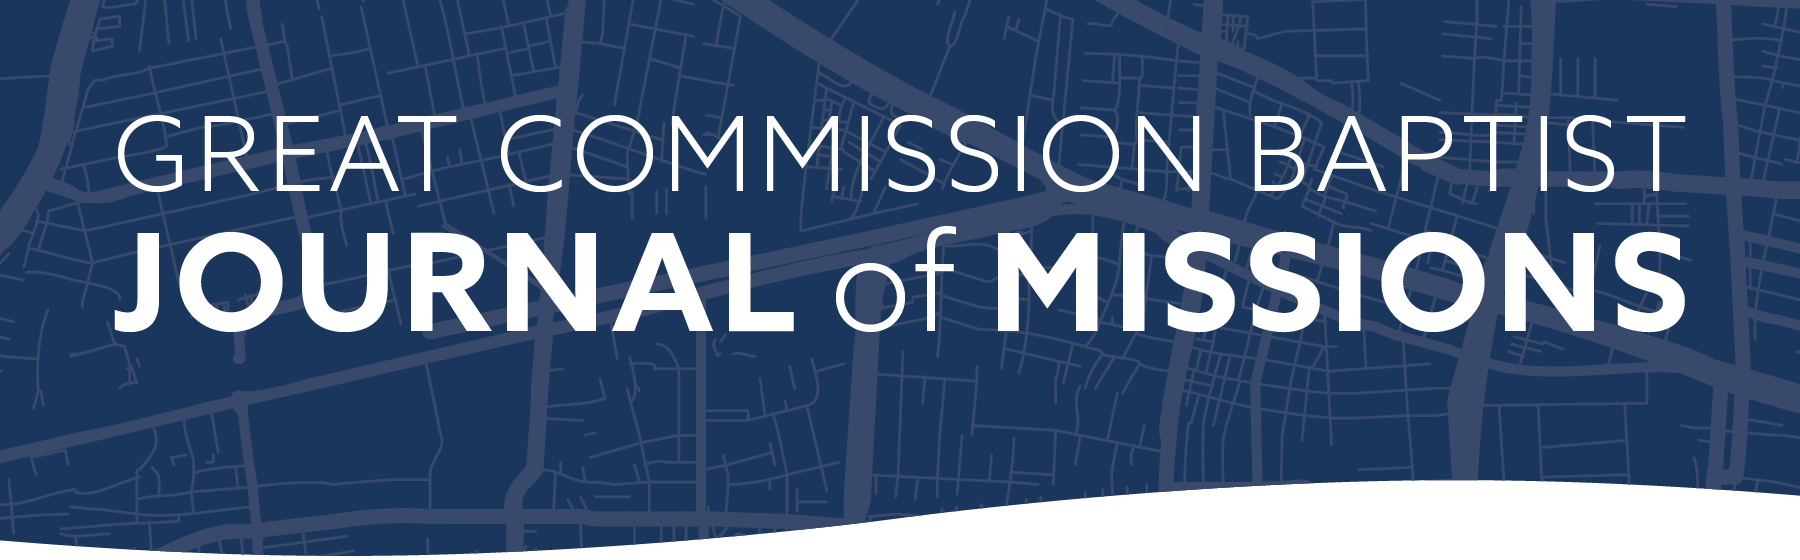 Great Commission Baptist Journal of Missions